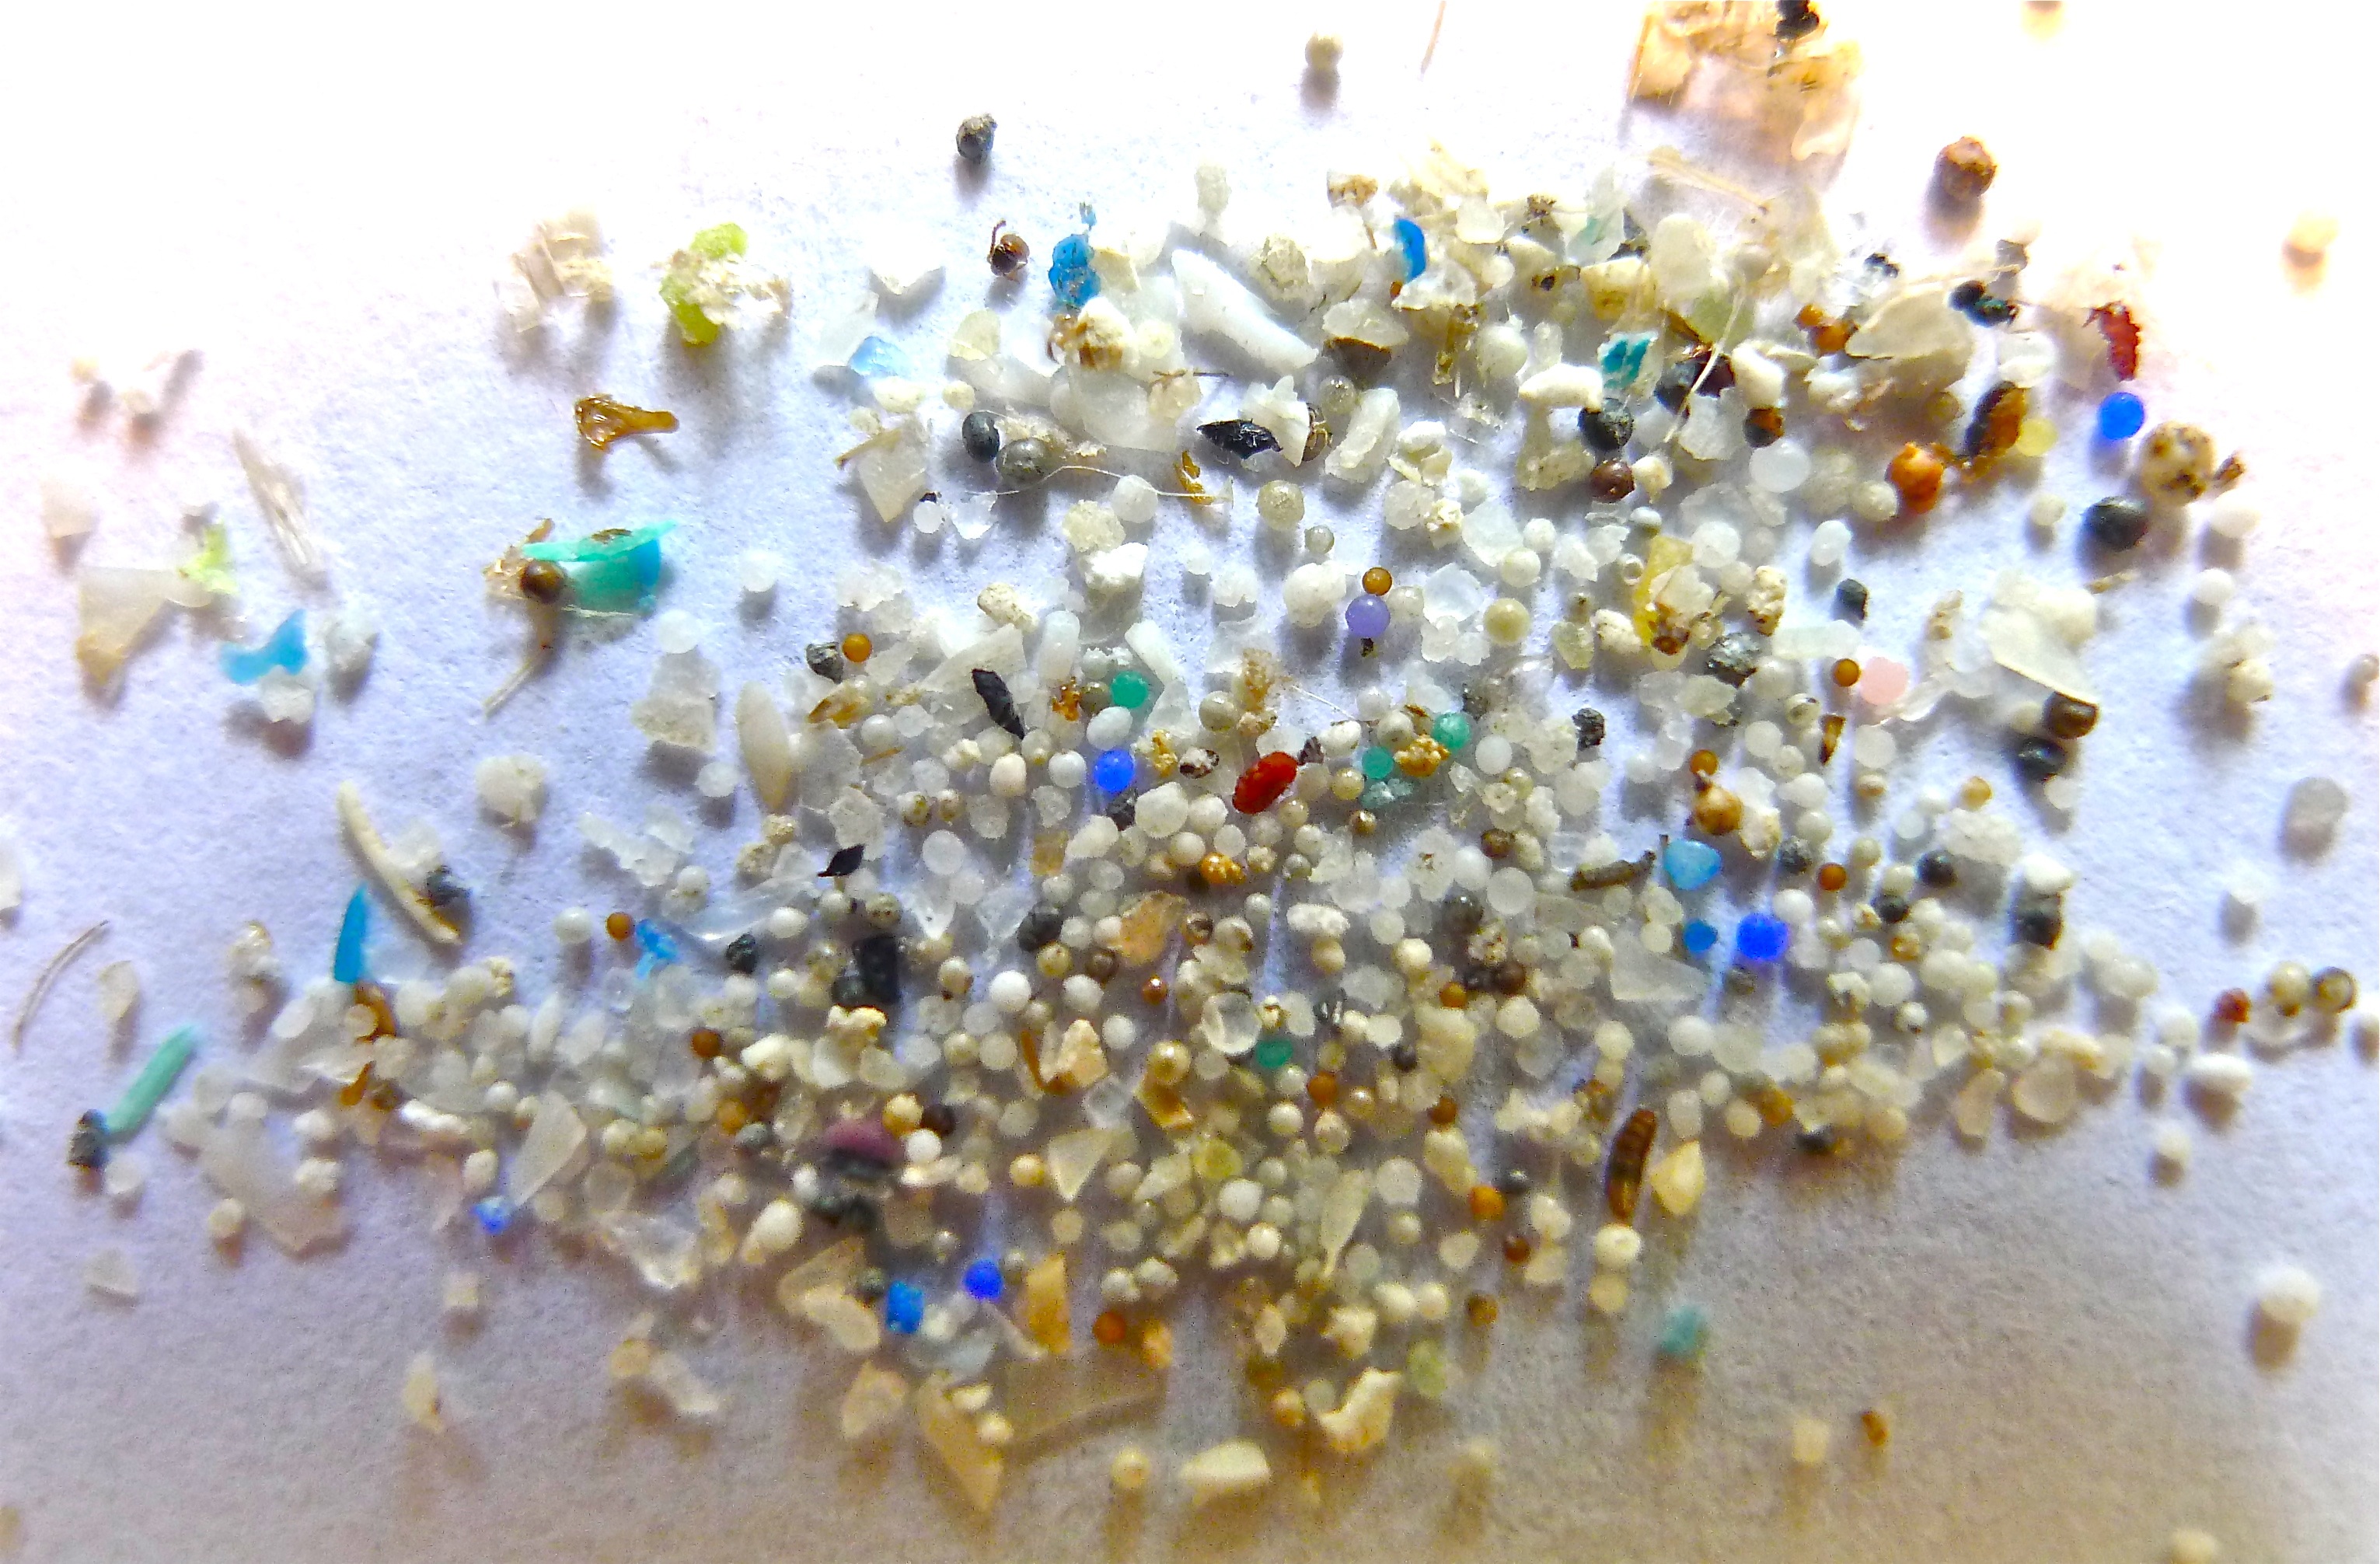 A collection of microplastic crumbs